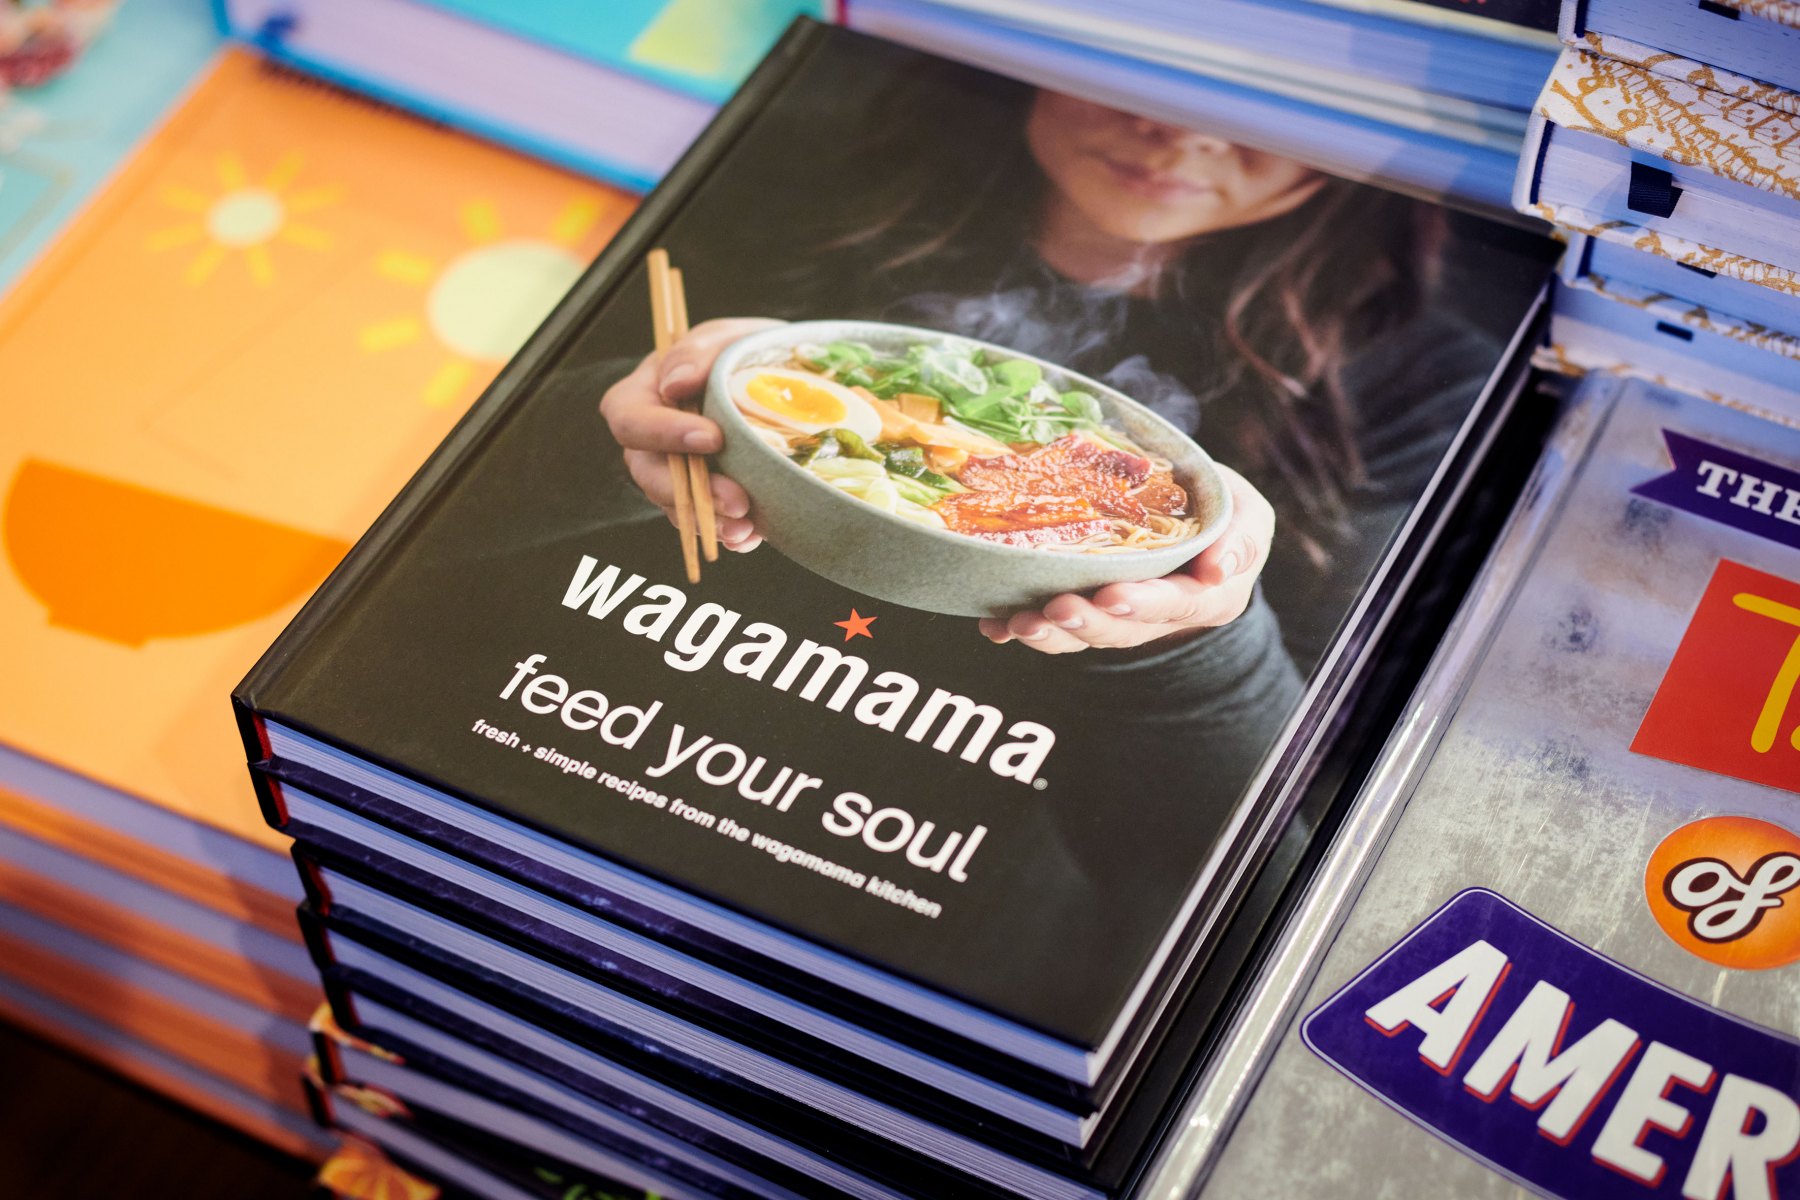 Wagamama-Feed-your-soul-stacked-for-web